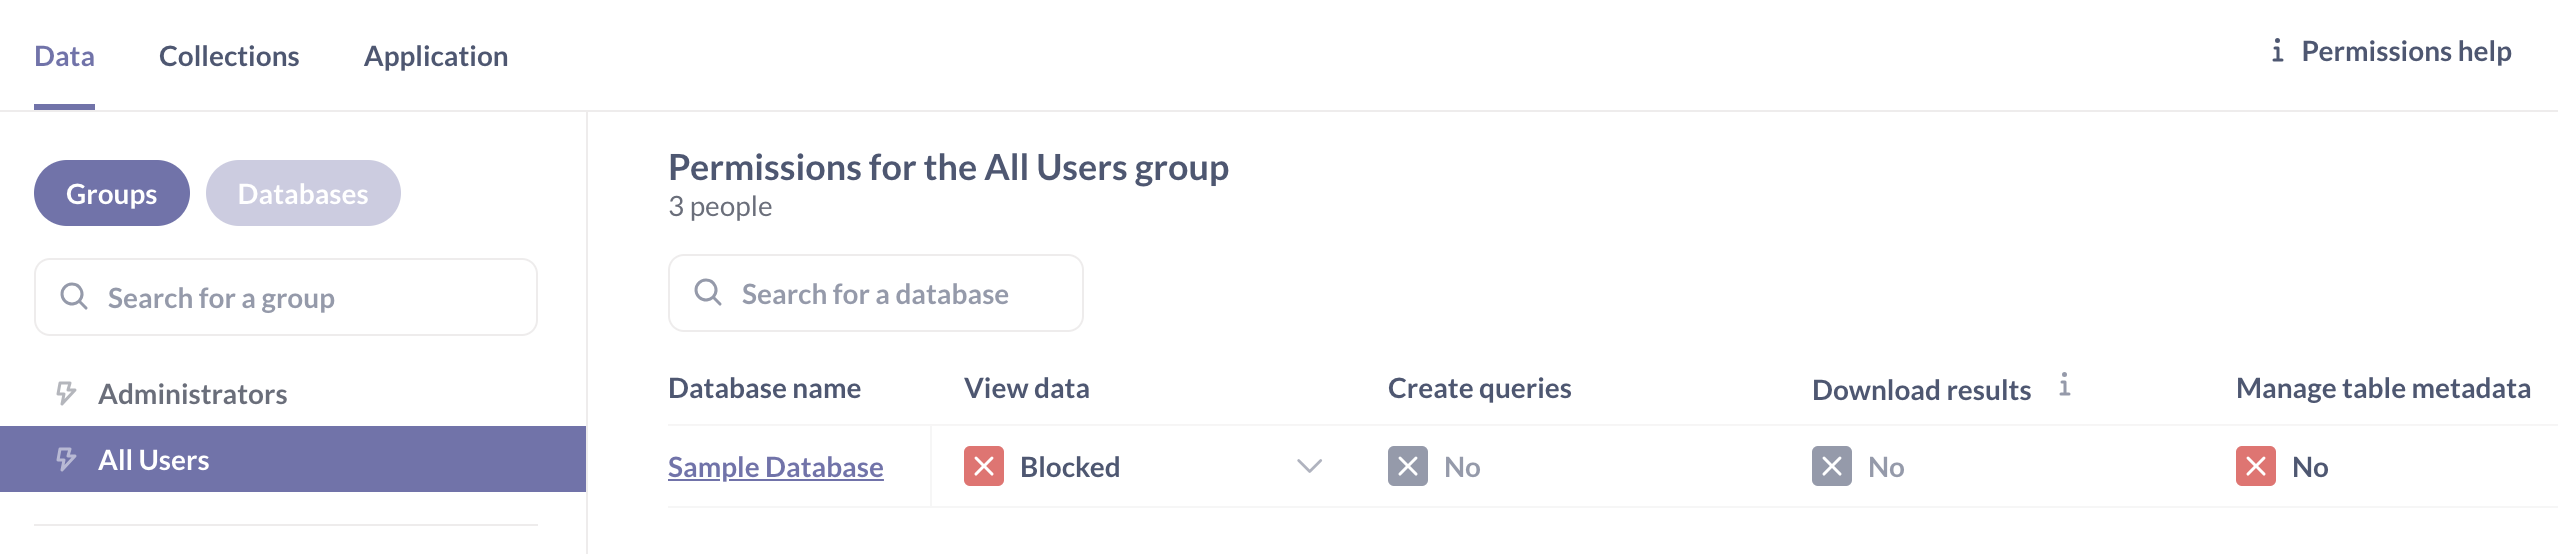 Resetting permissions of the All Users group to